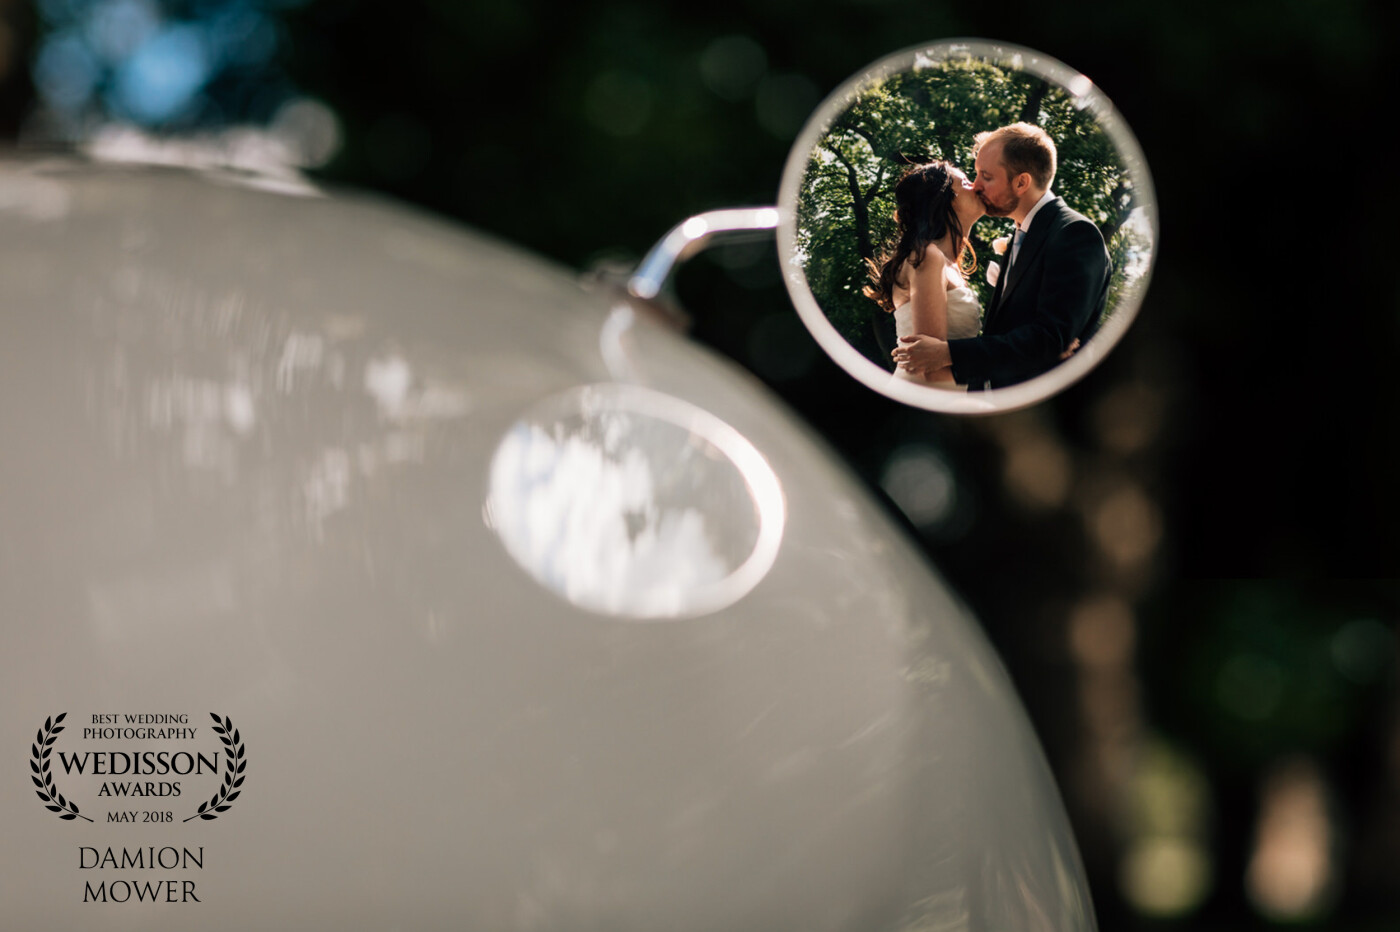 Thank you for this award.  Karena and Adam's wedding at Goodwood House was a fabulous day.  We managed to sneak away from guests in their wedding car and capture this reflection in the car wing mirror.<br />
